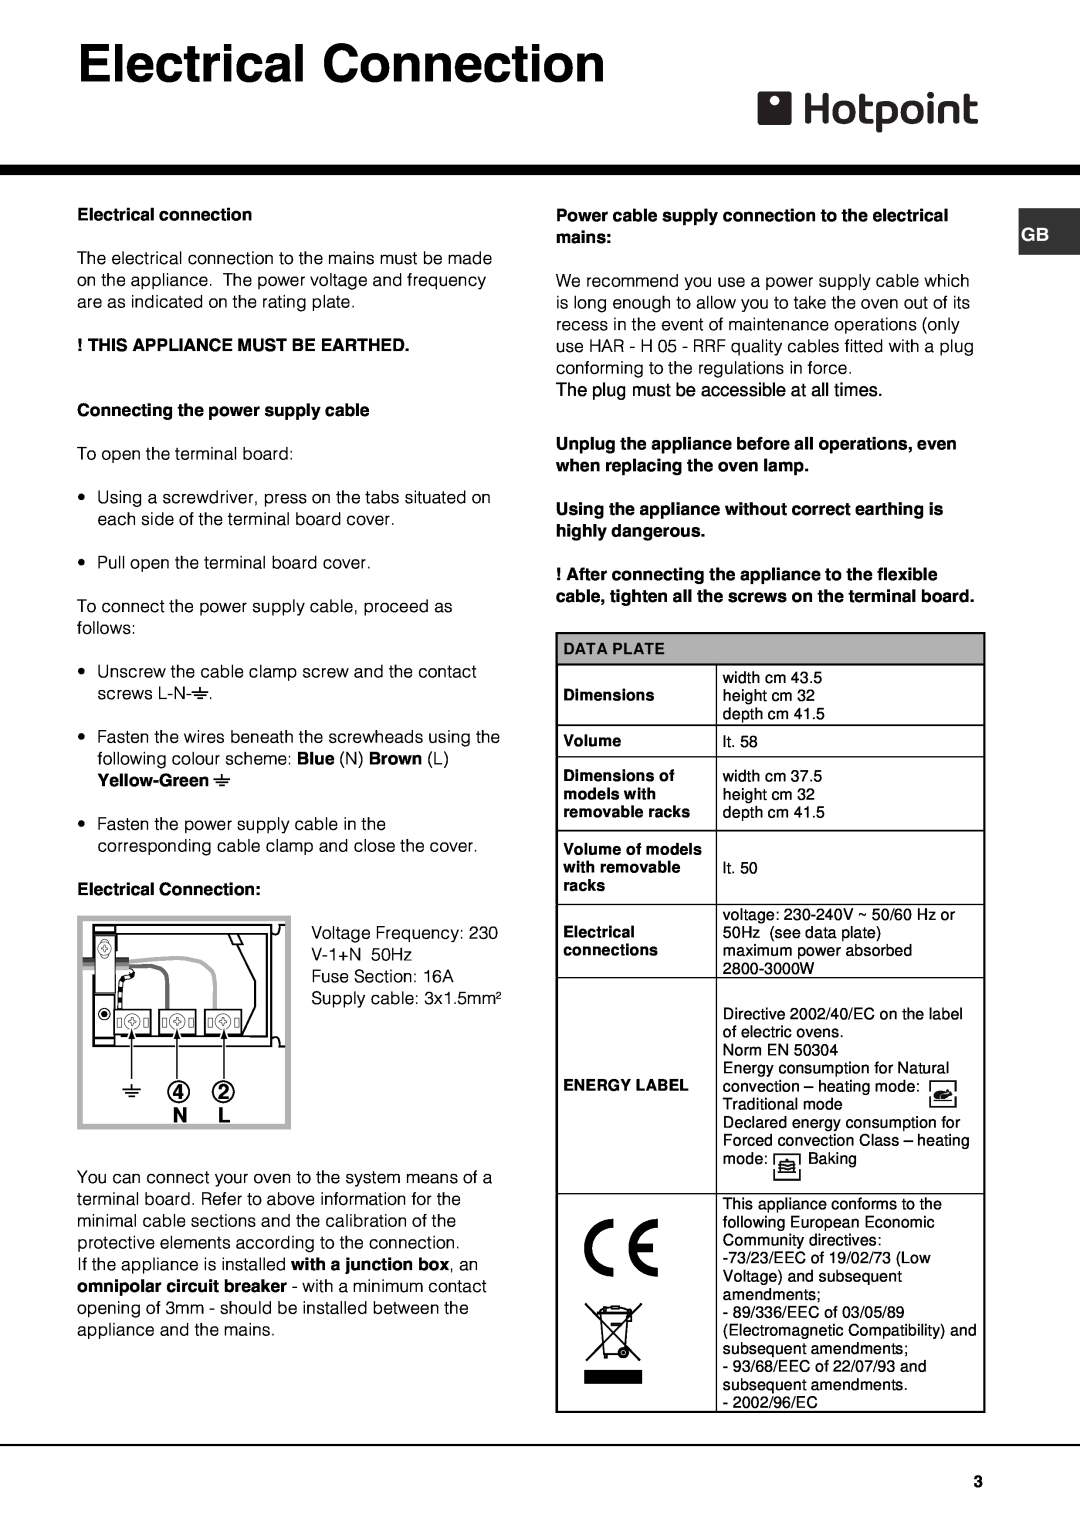 Hotpoint SE61X operating instructions Electrical Connection, 4 2 N L 